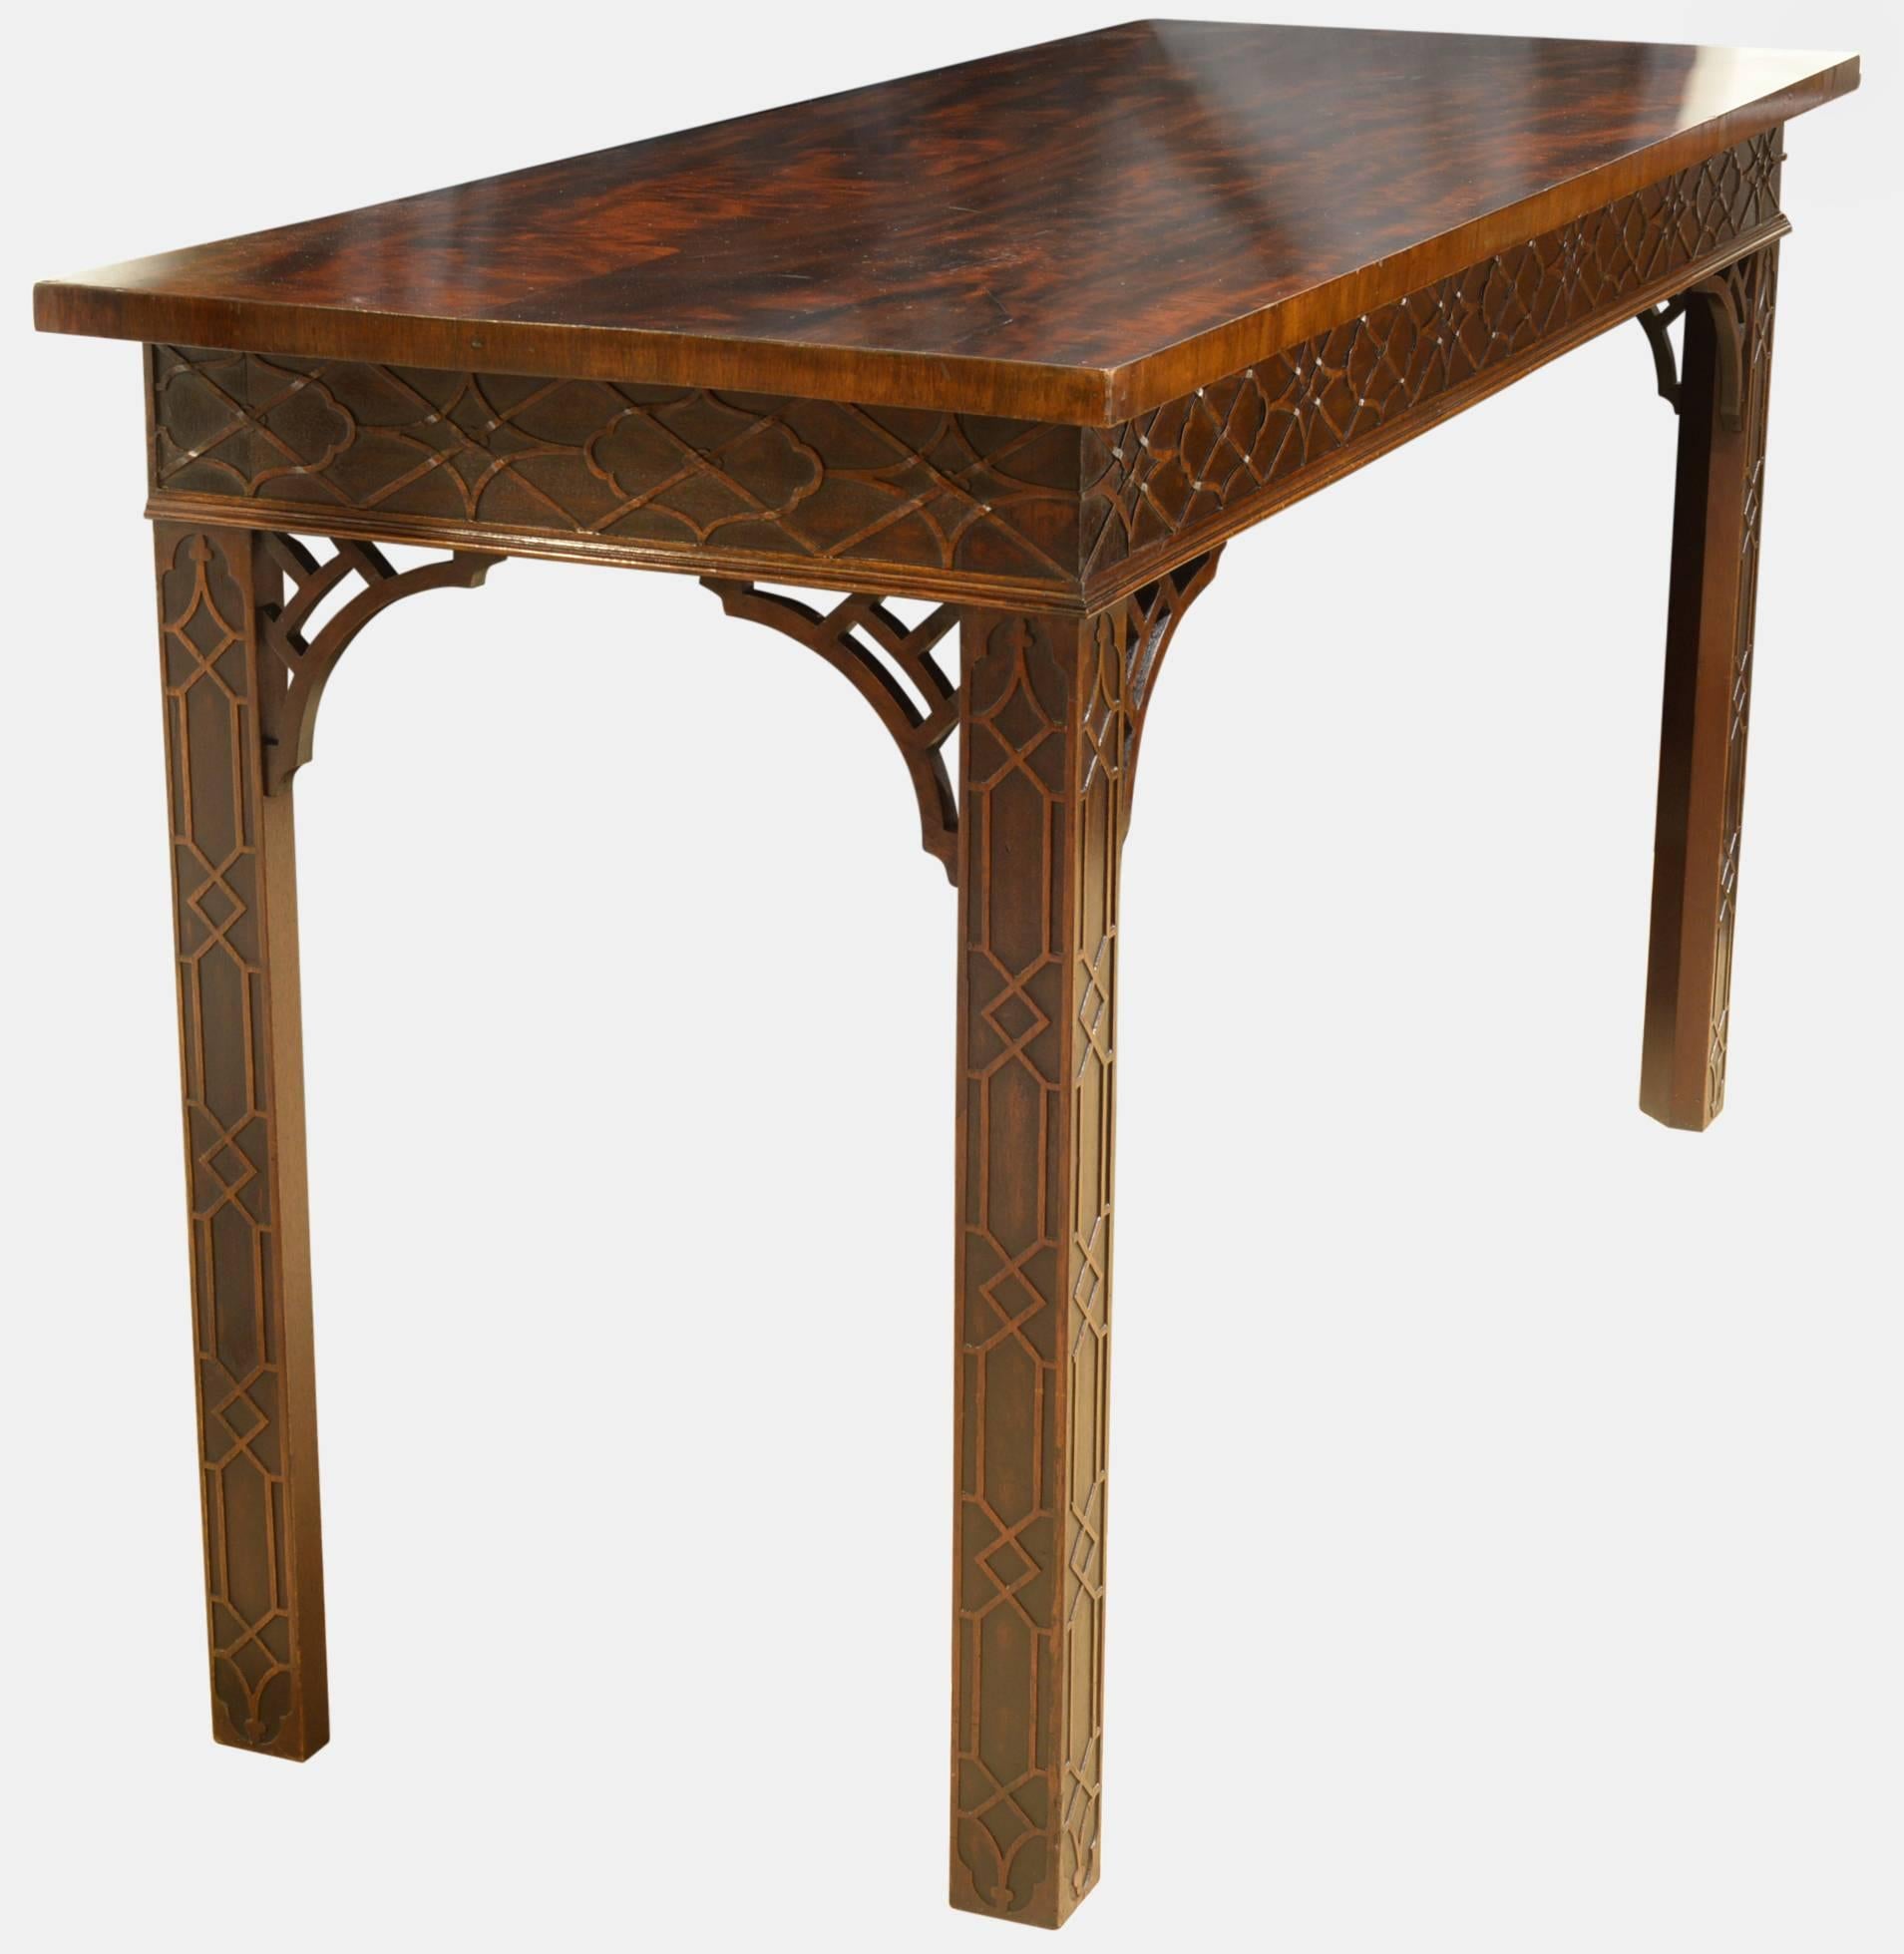 A mahogany Chippendale style 19th century serving table with blind fret decoration to the apron,

circa 1830.